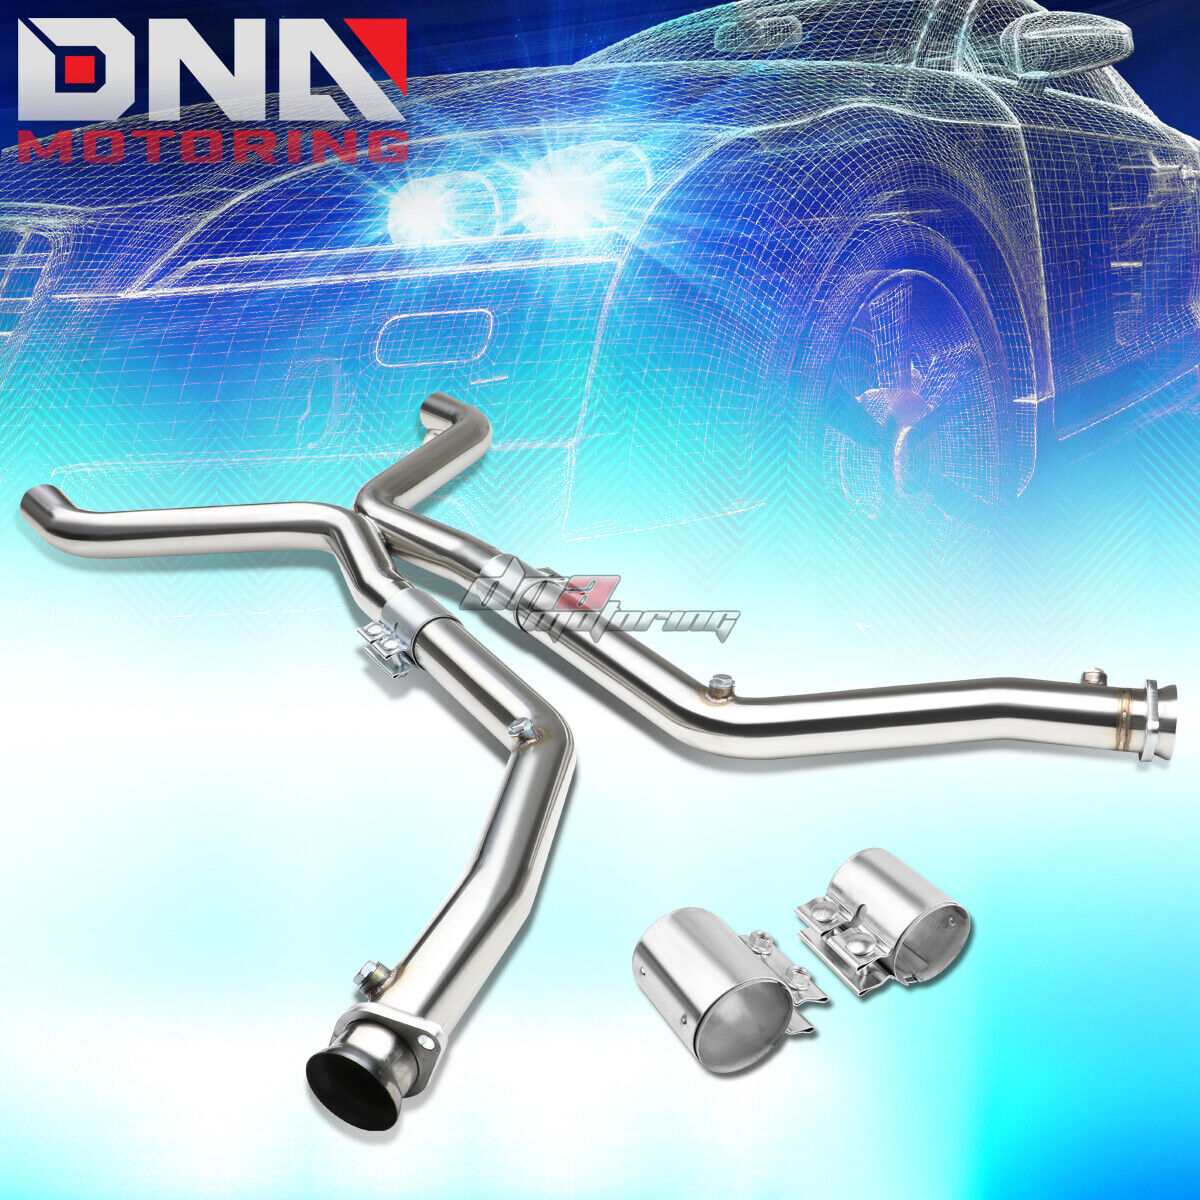 FOR 11-14 MUSTANG 3.7L V6 STAINLESS PERFORMANCE X-PIPE DOWNPIPE CATBACK EXHAUST